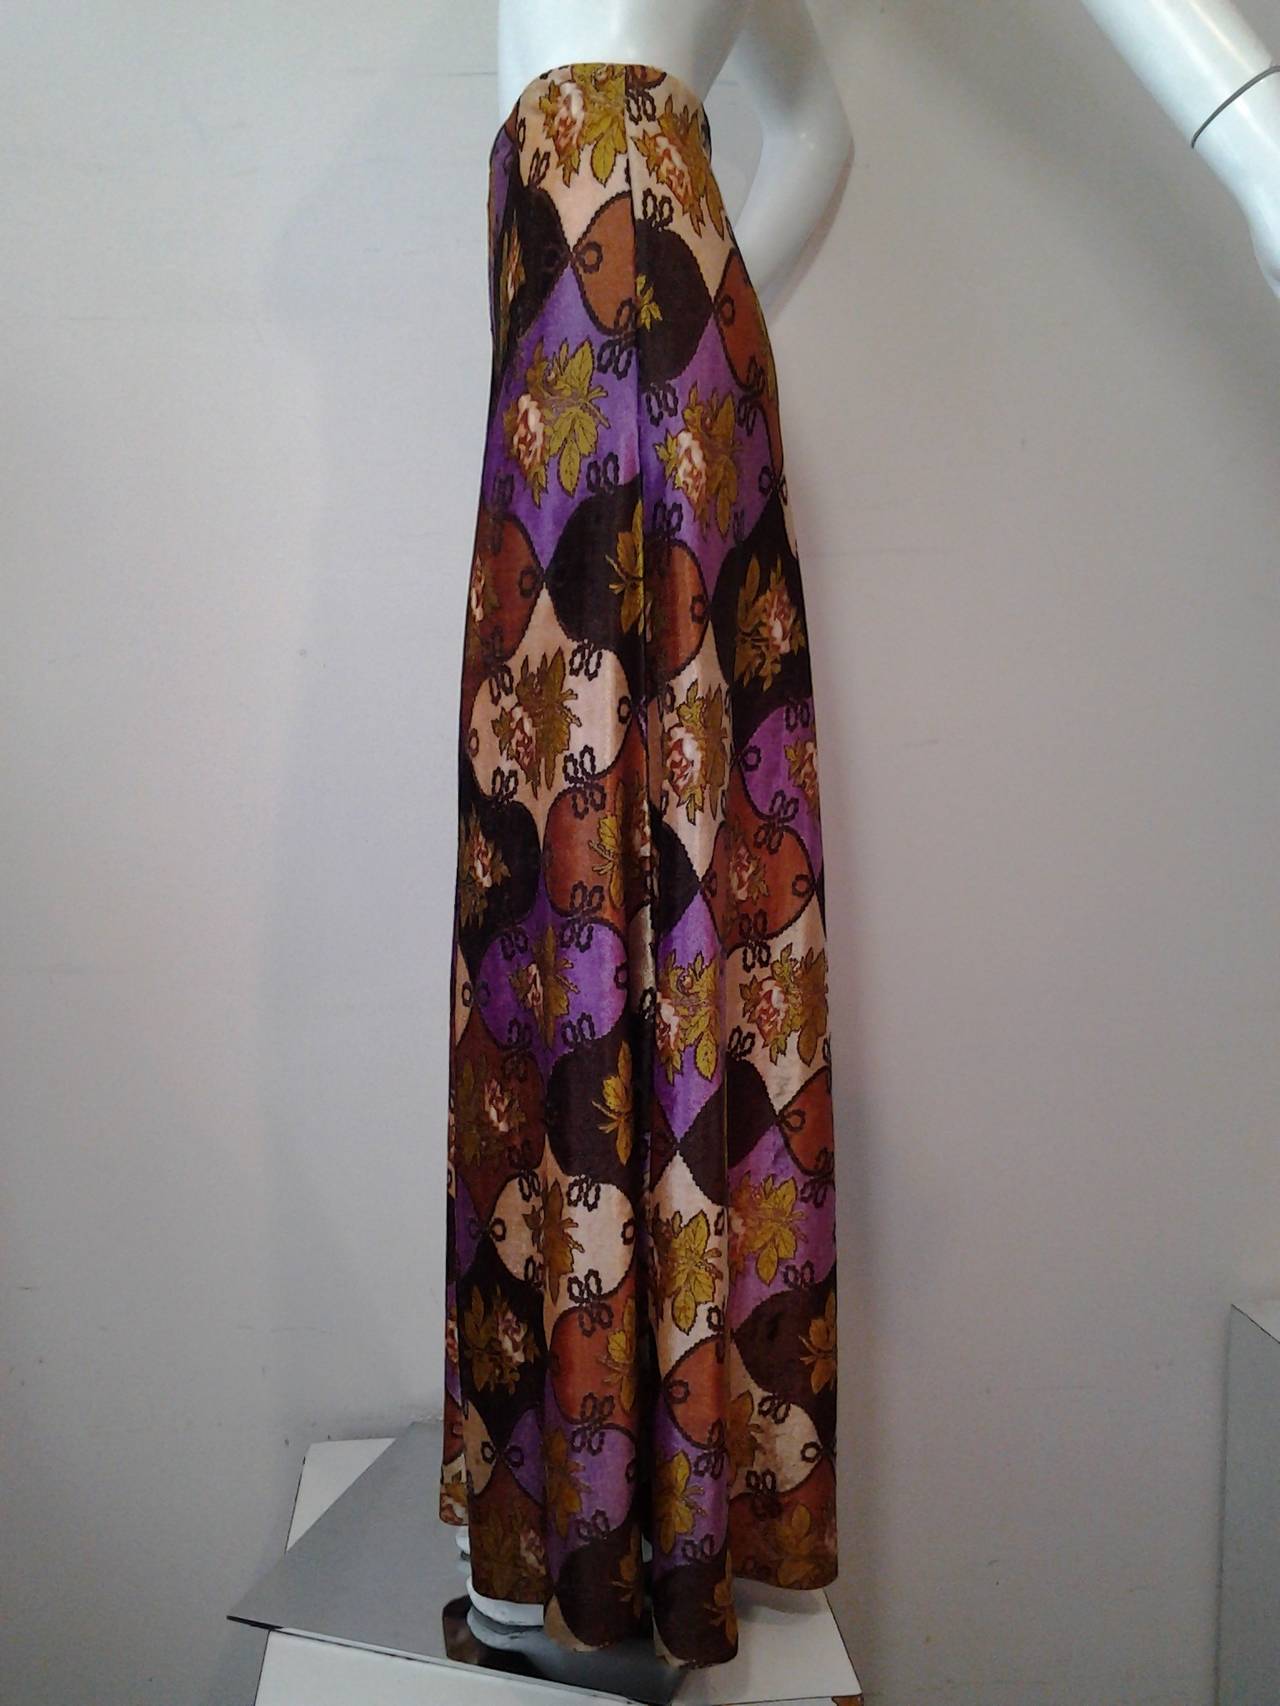 A fabulous fun 1970s Campus Casuals panne velvet Harlequin print palazzo pants!  shades of violet, black, olive cream and gold. Unlined